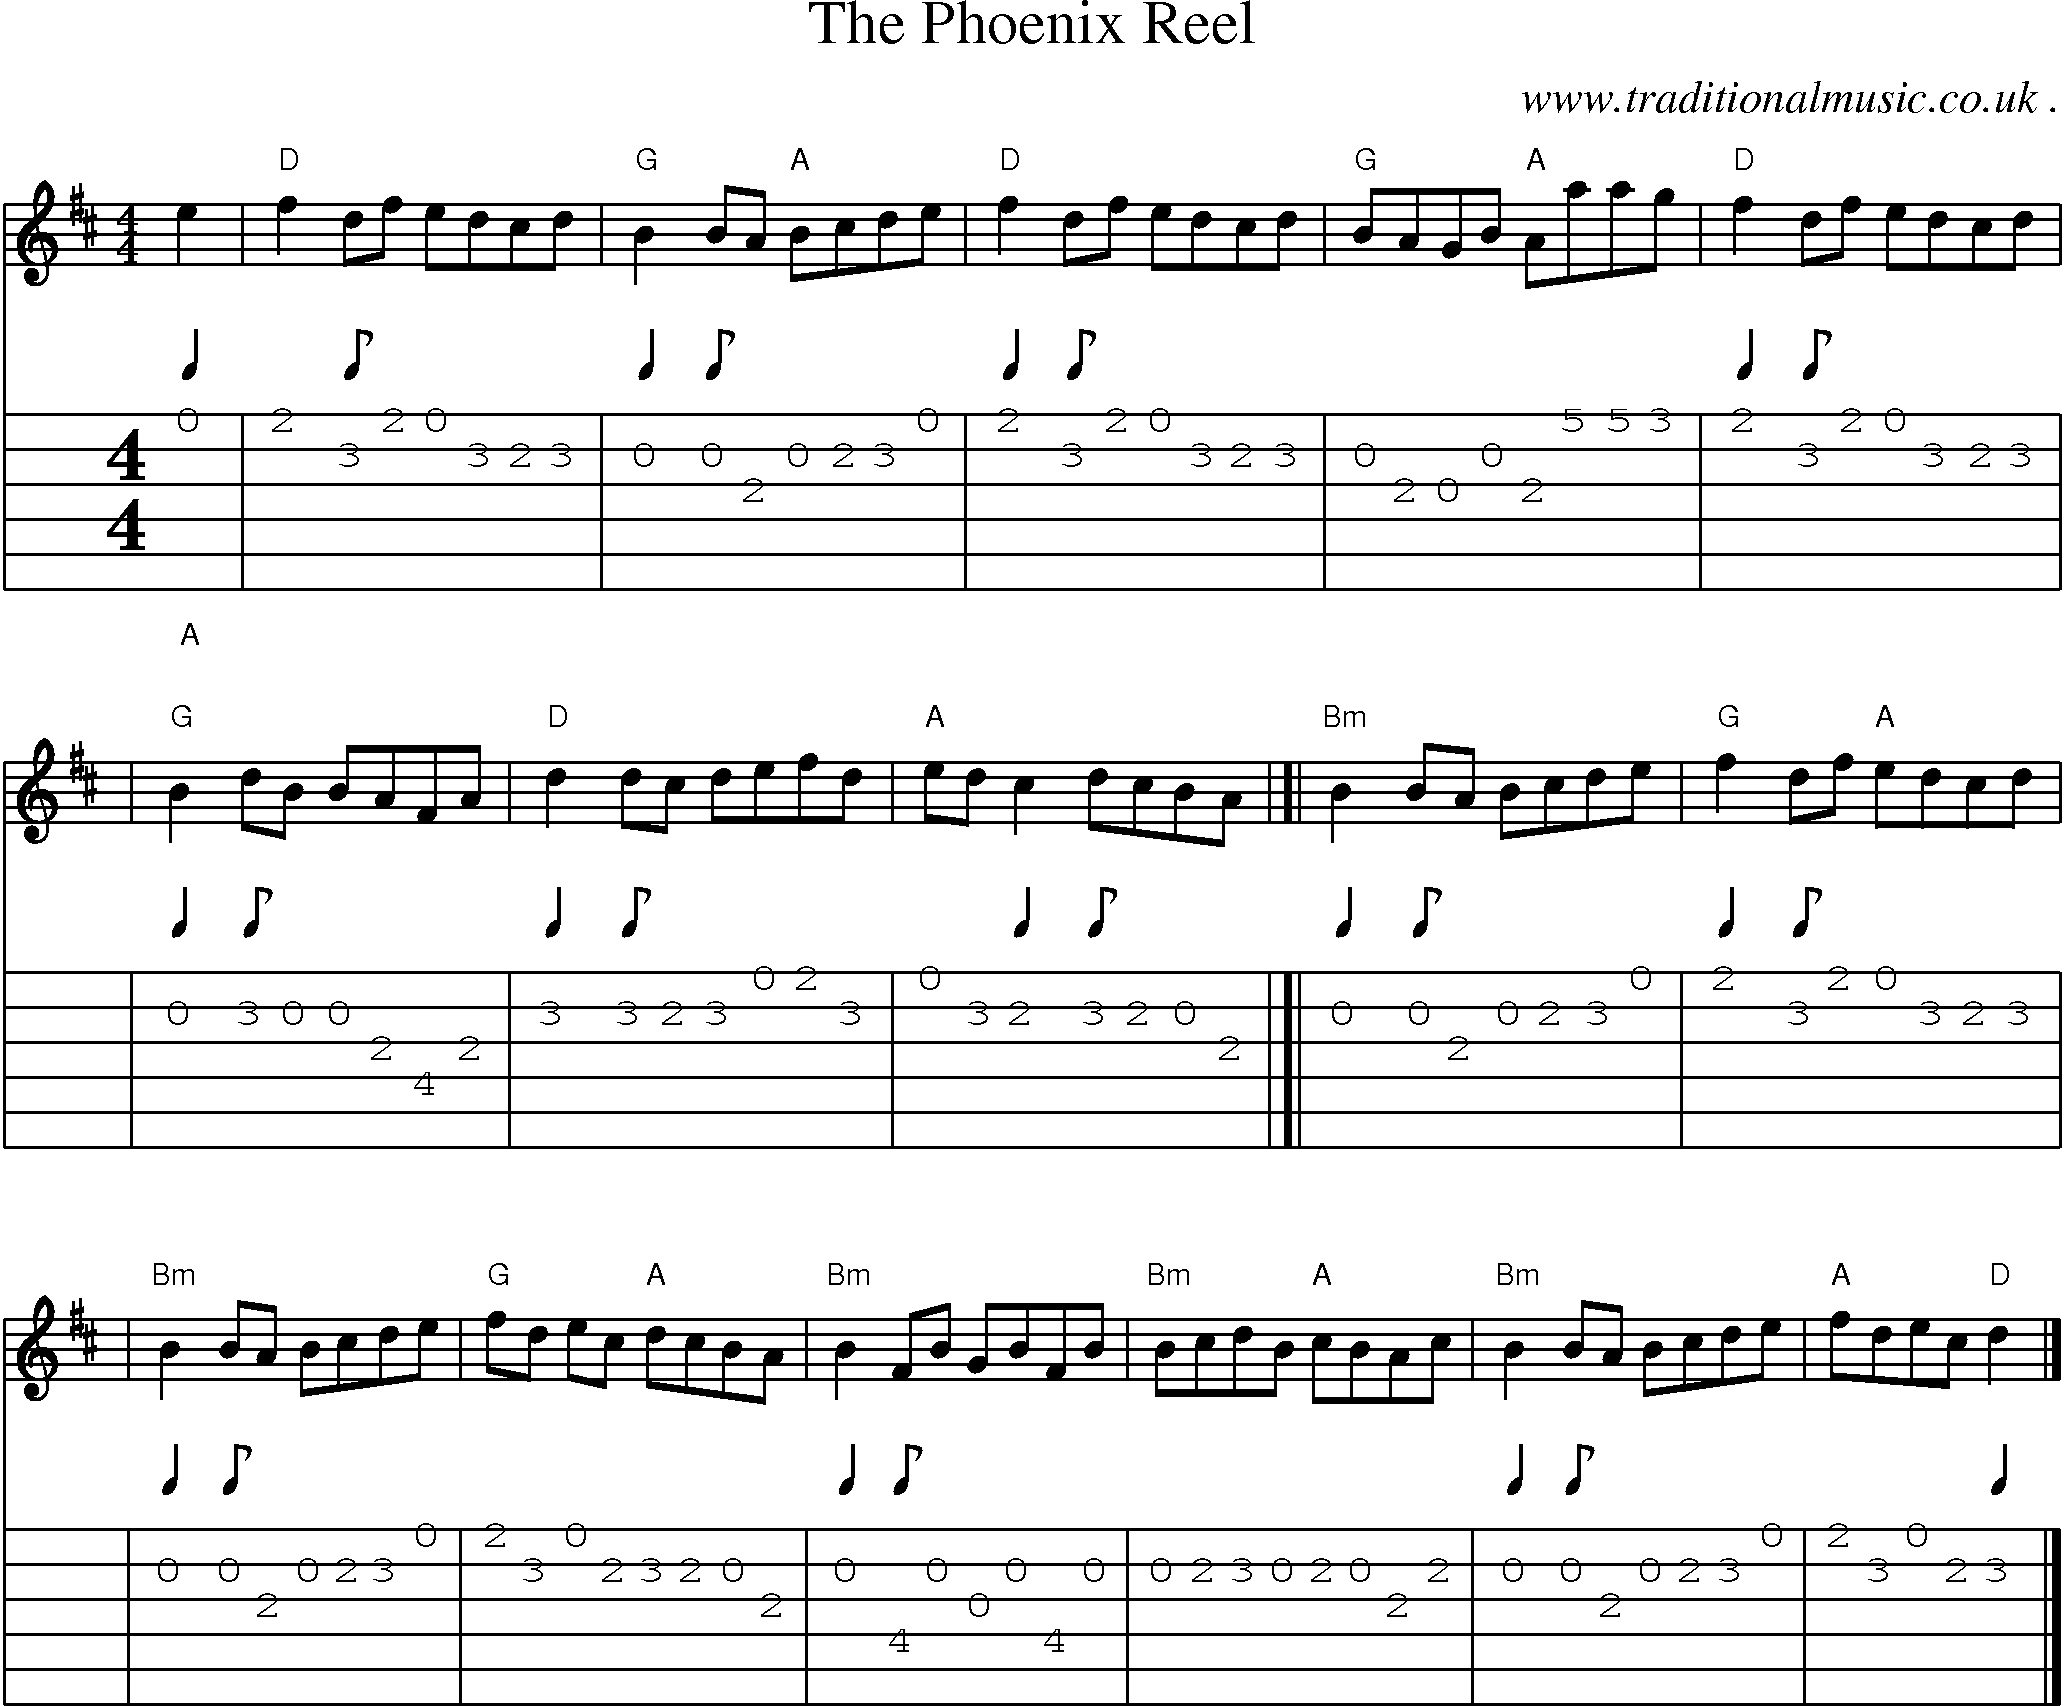 Sheet-music  score, Chords and Guitar Tabs for The Phoenix Reel